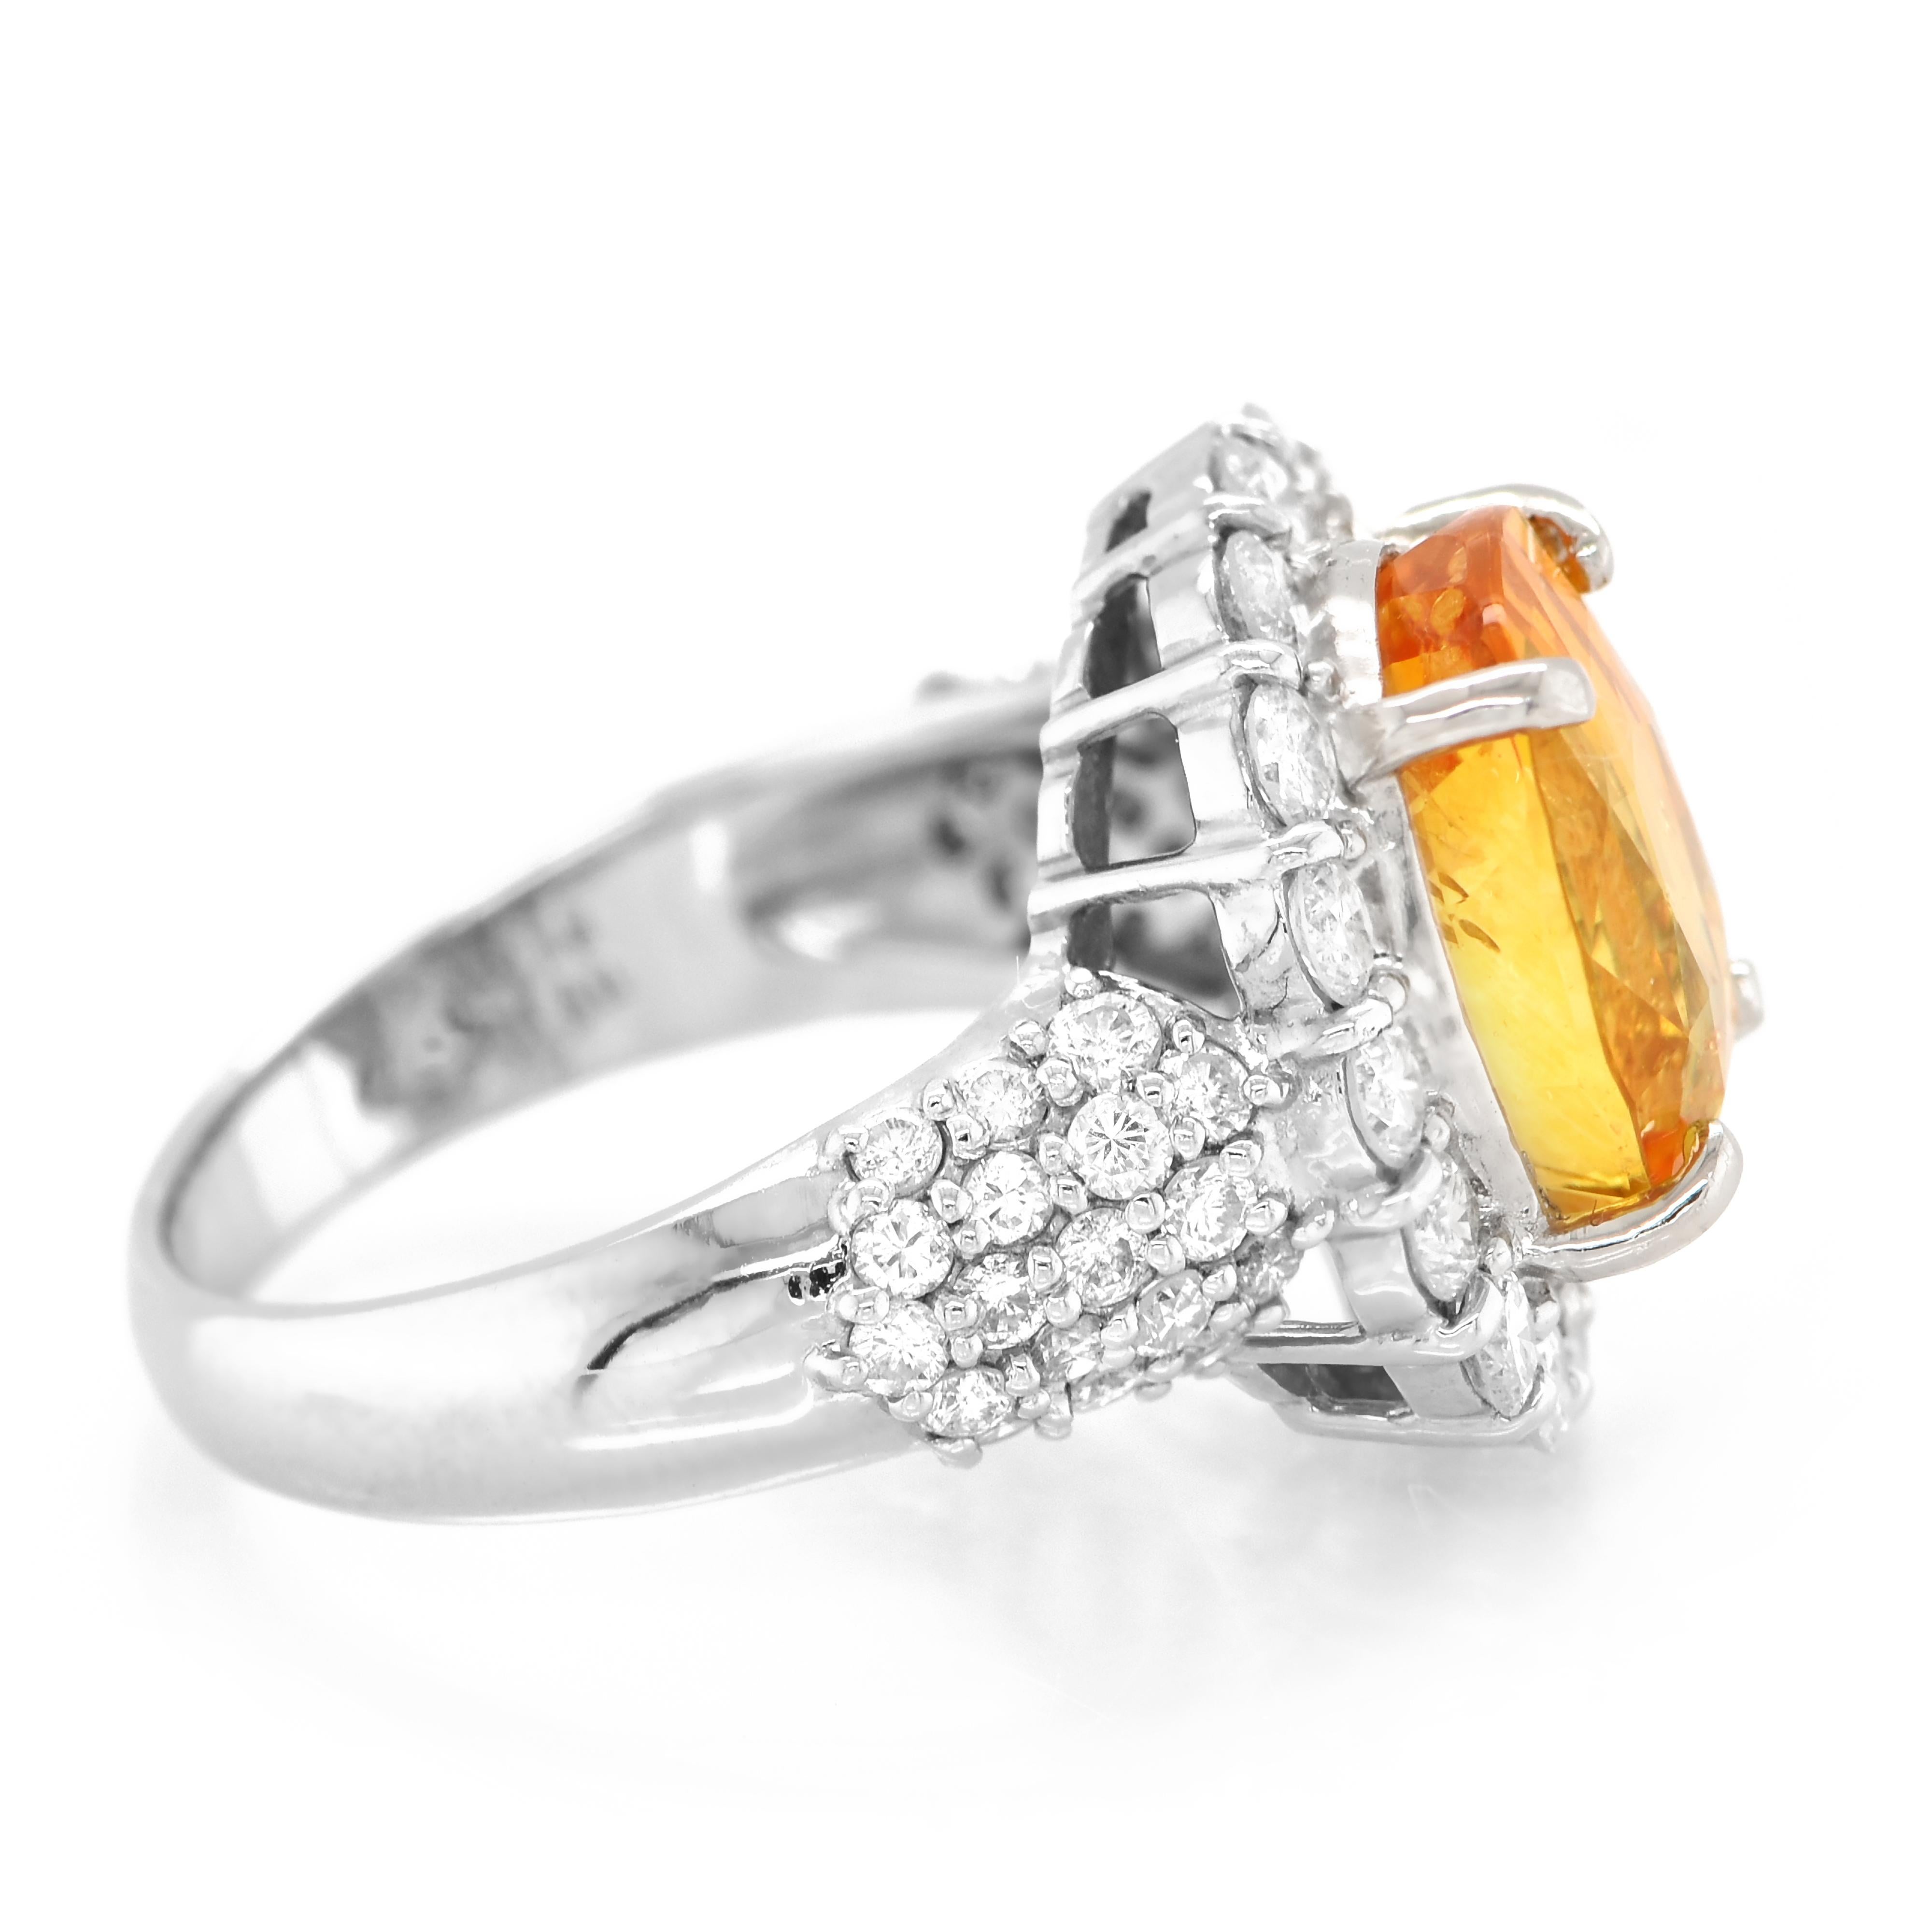 Oval Cut GIA Certified 6.10 Carat Natural Yellow Sapphire & Diamond Ring Set in Platinum